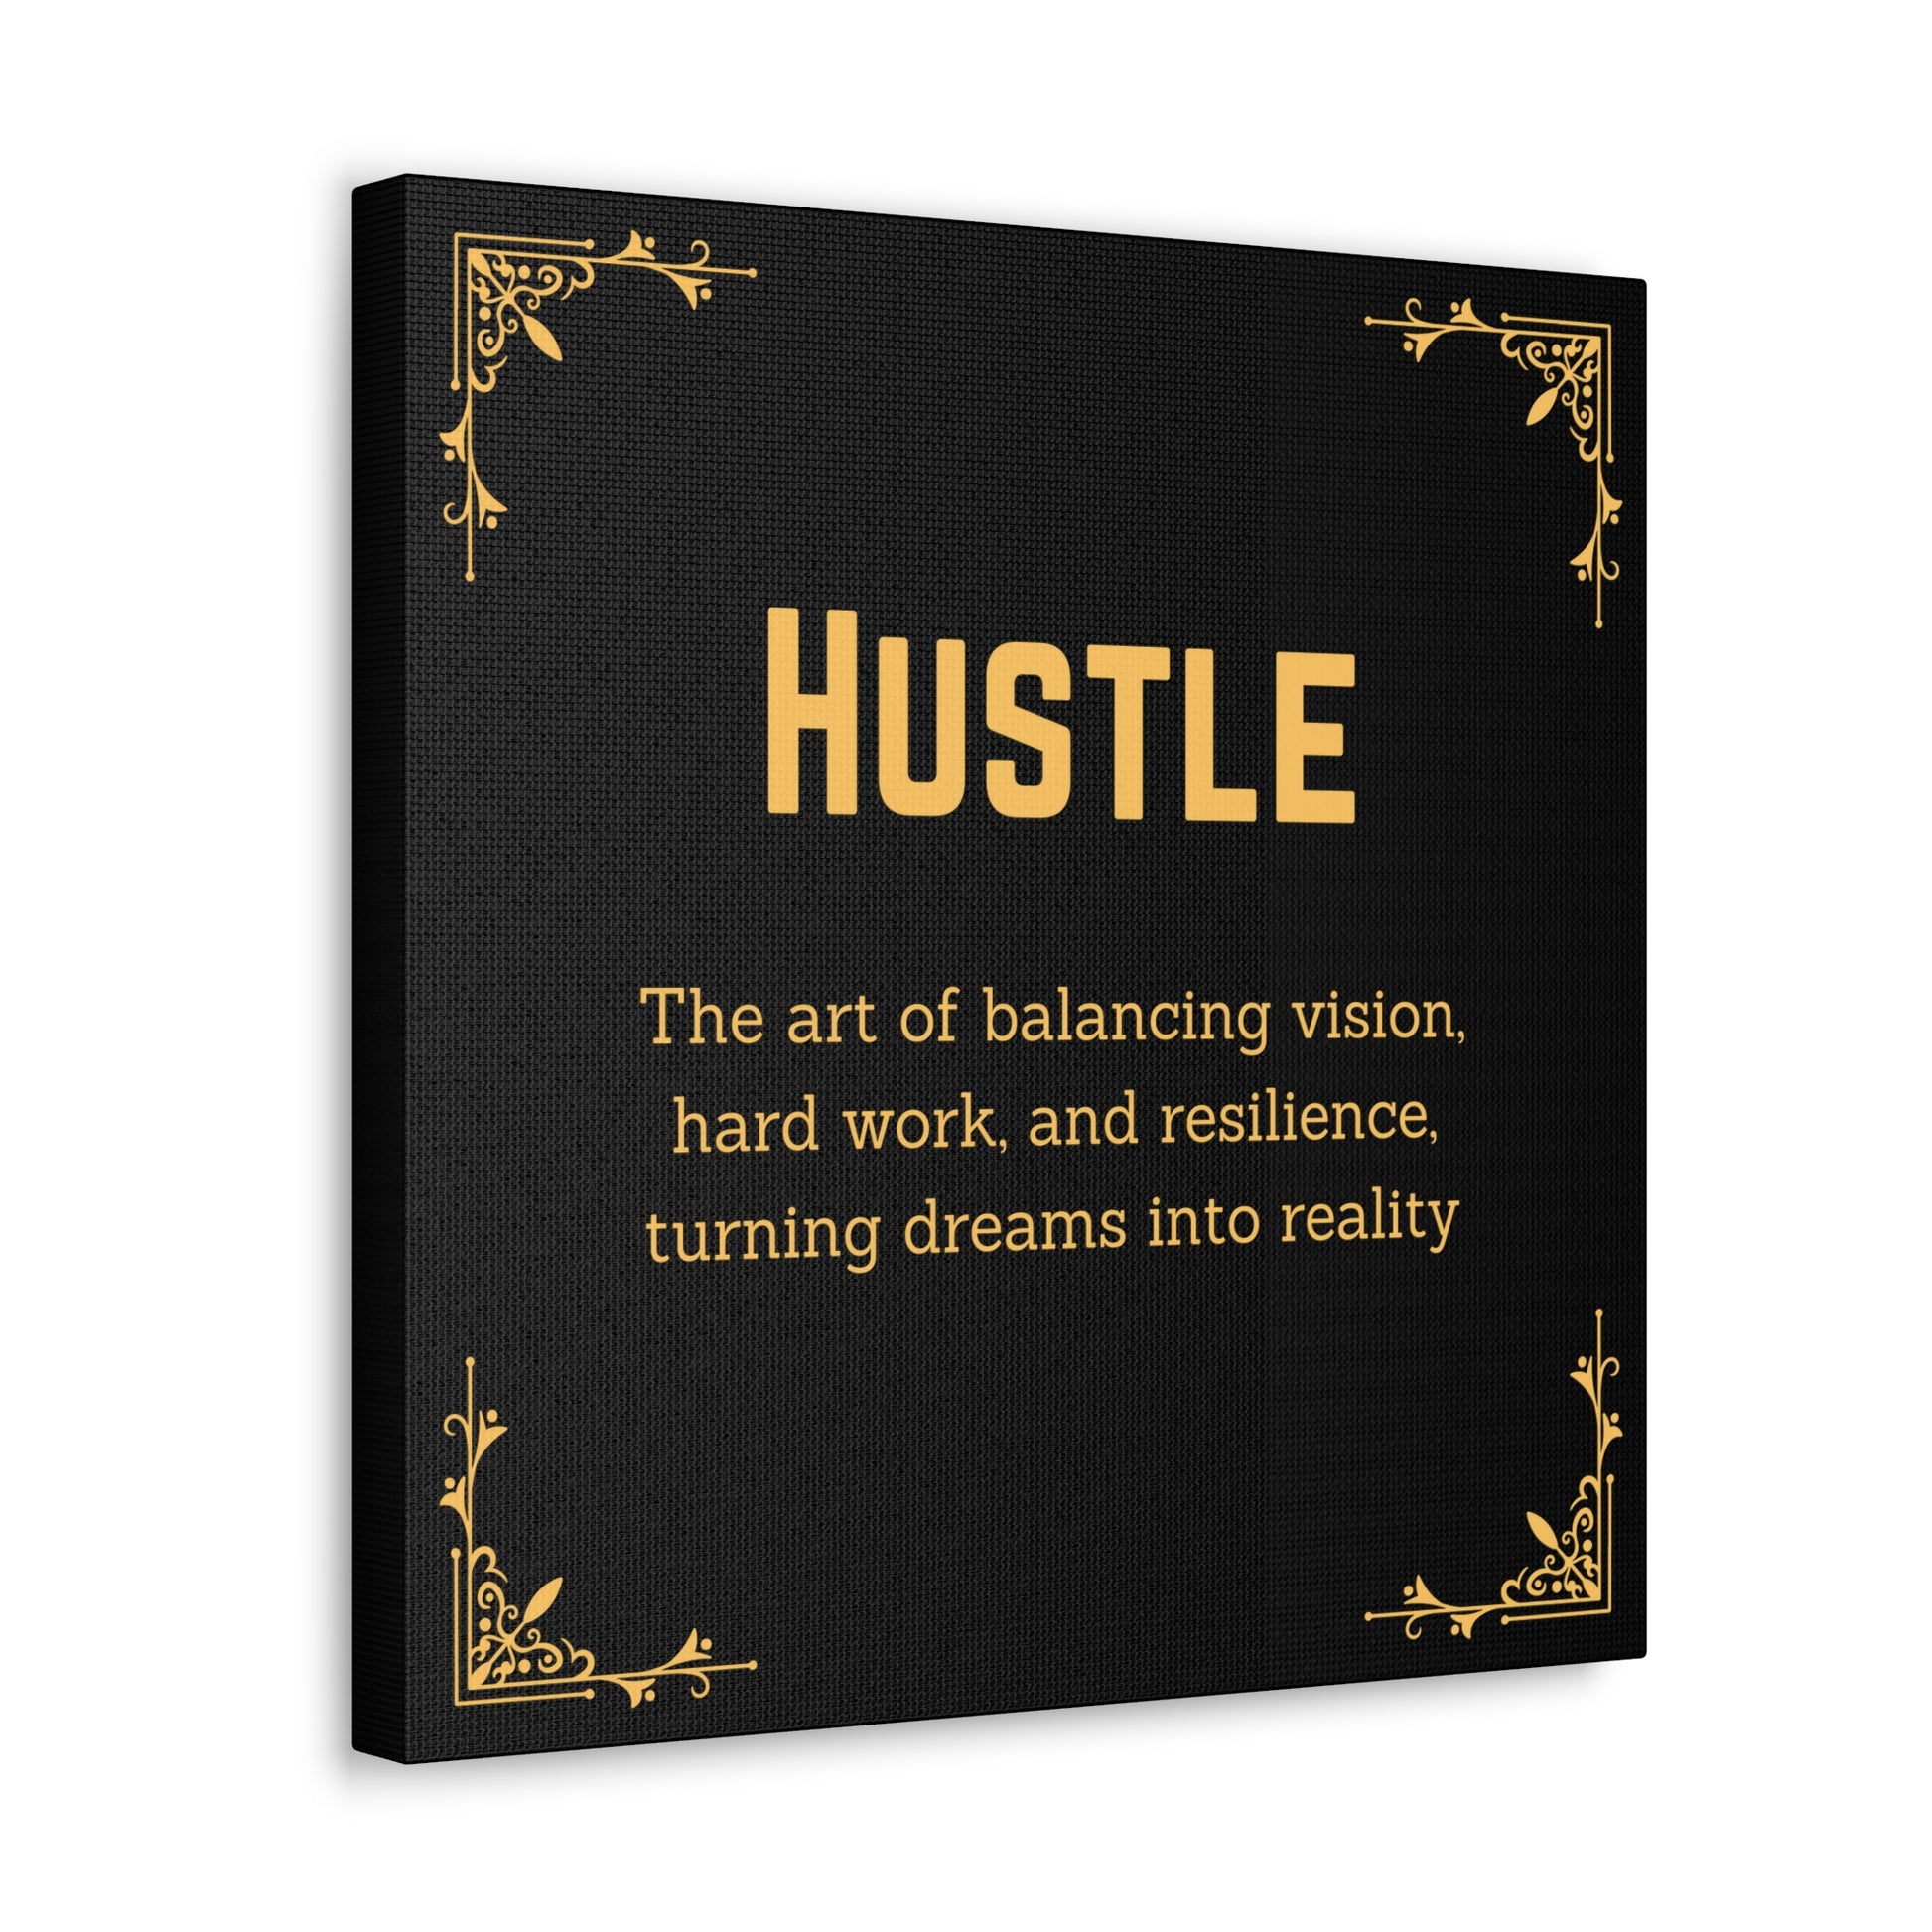 "Hustle" Wall Art - Weave Got Gifts - Unique Gifts You Won’t Find Anywhere Else!